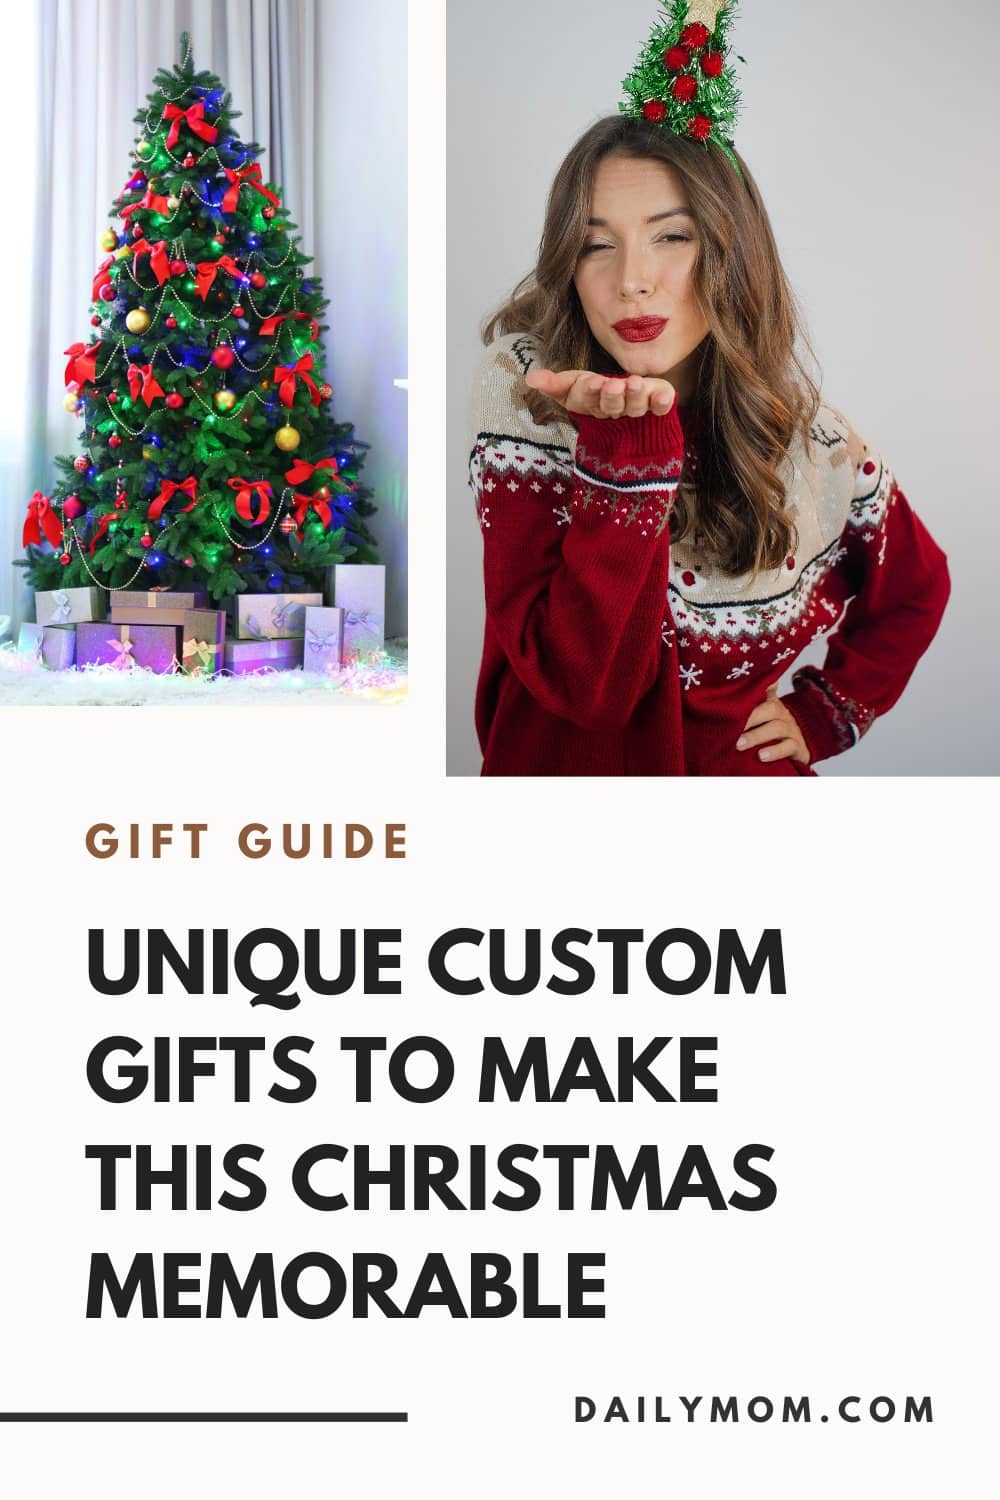 14 Unique Custom Gifts To Make This Christmas Memorable 33 Daily Mom, Magazine For Families